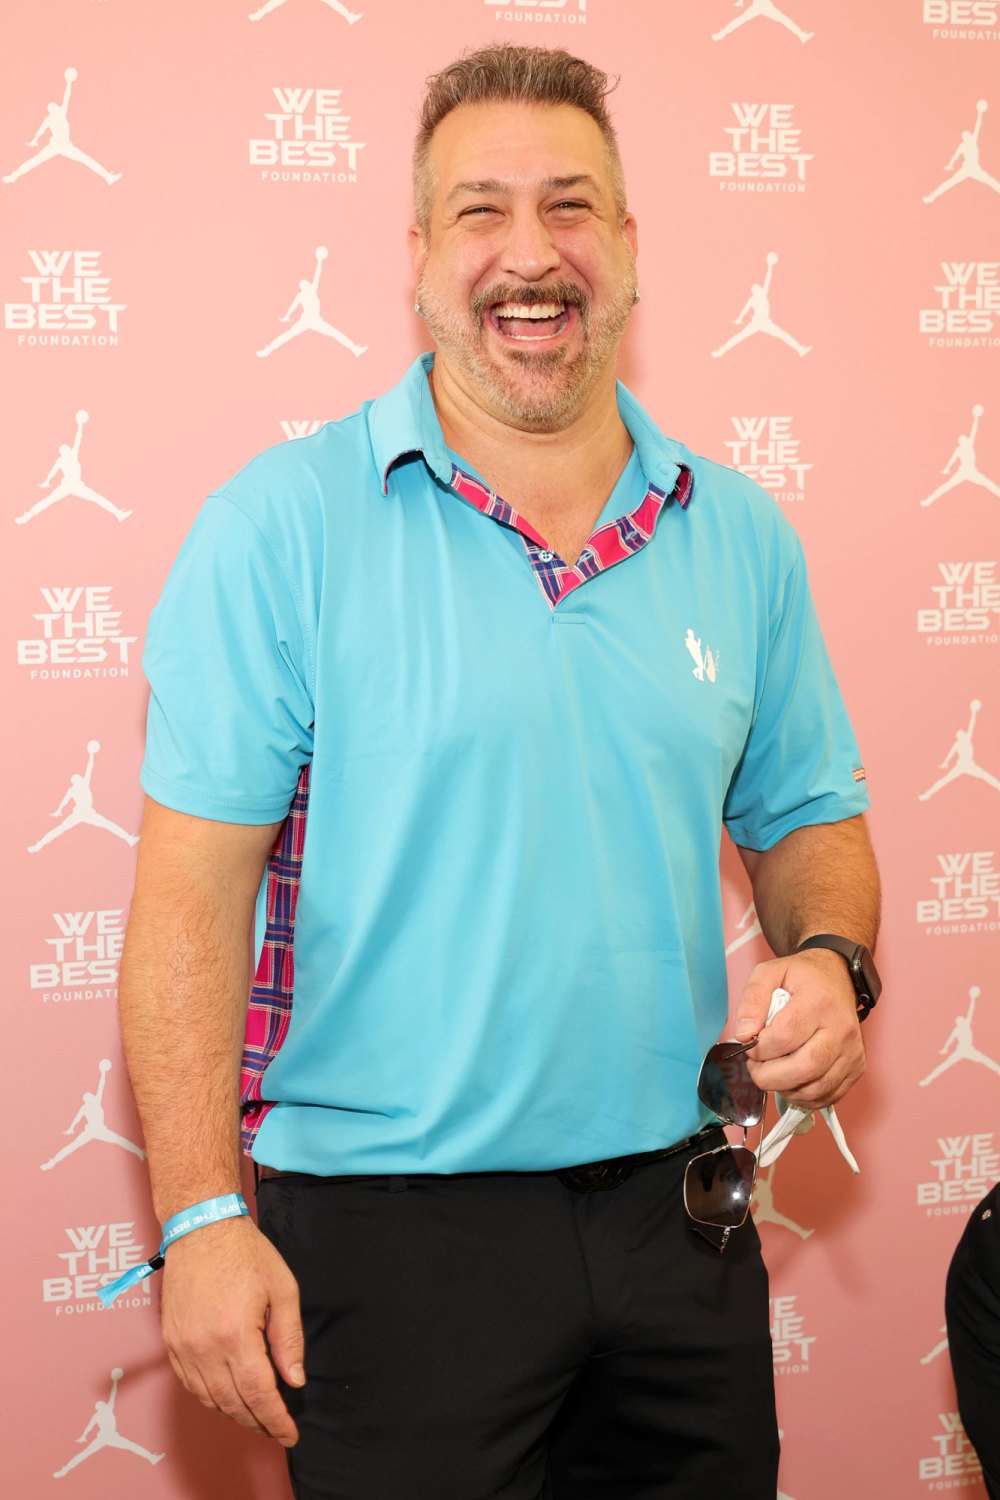 Joey Fatone Reveals the Cosmetic Procedure That Helped Him Lose 20 Lbs